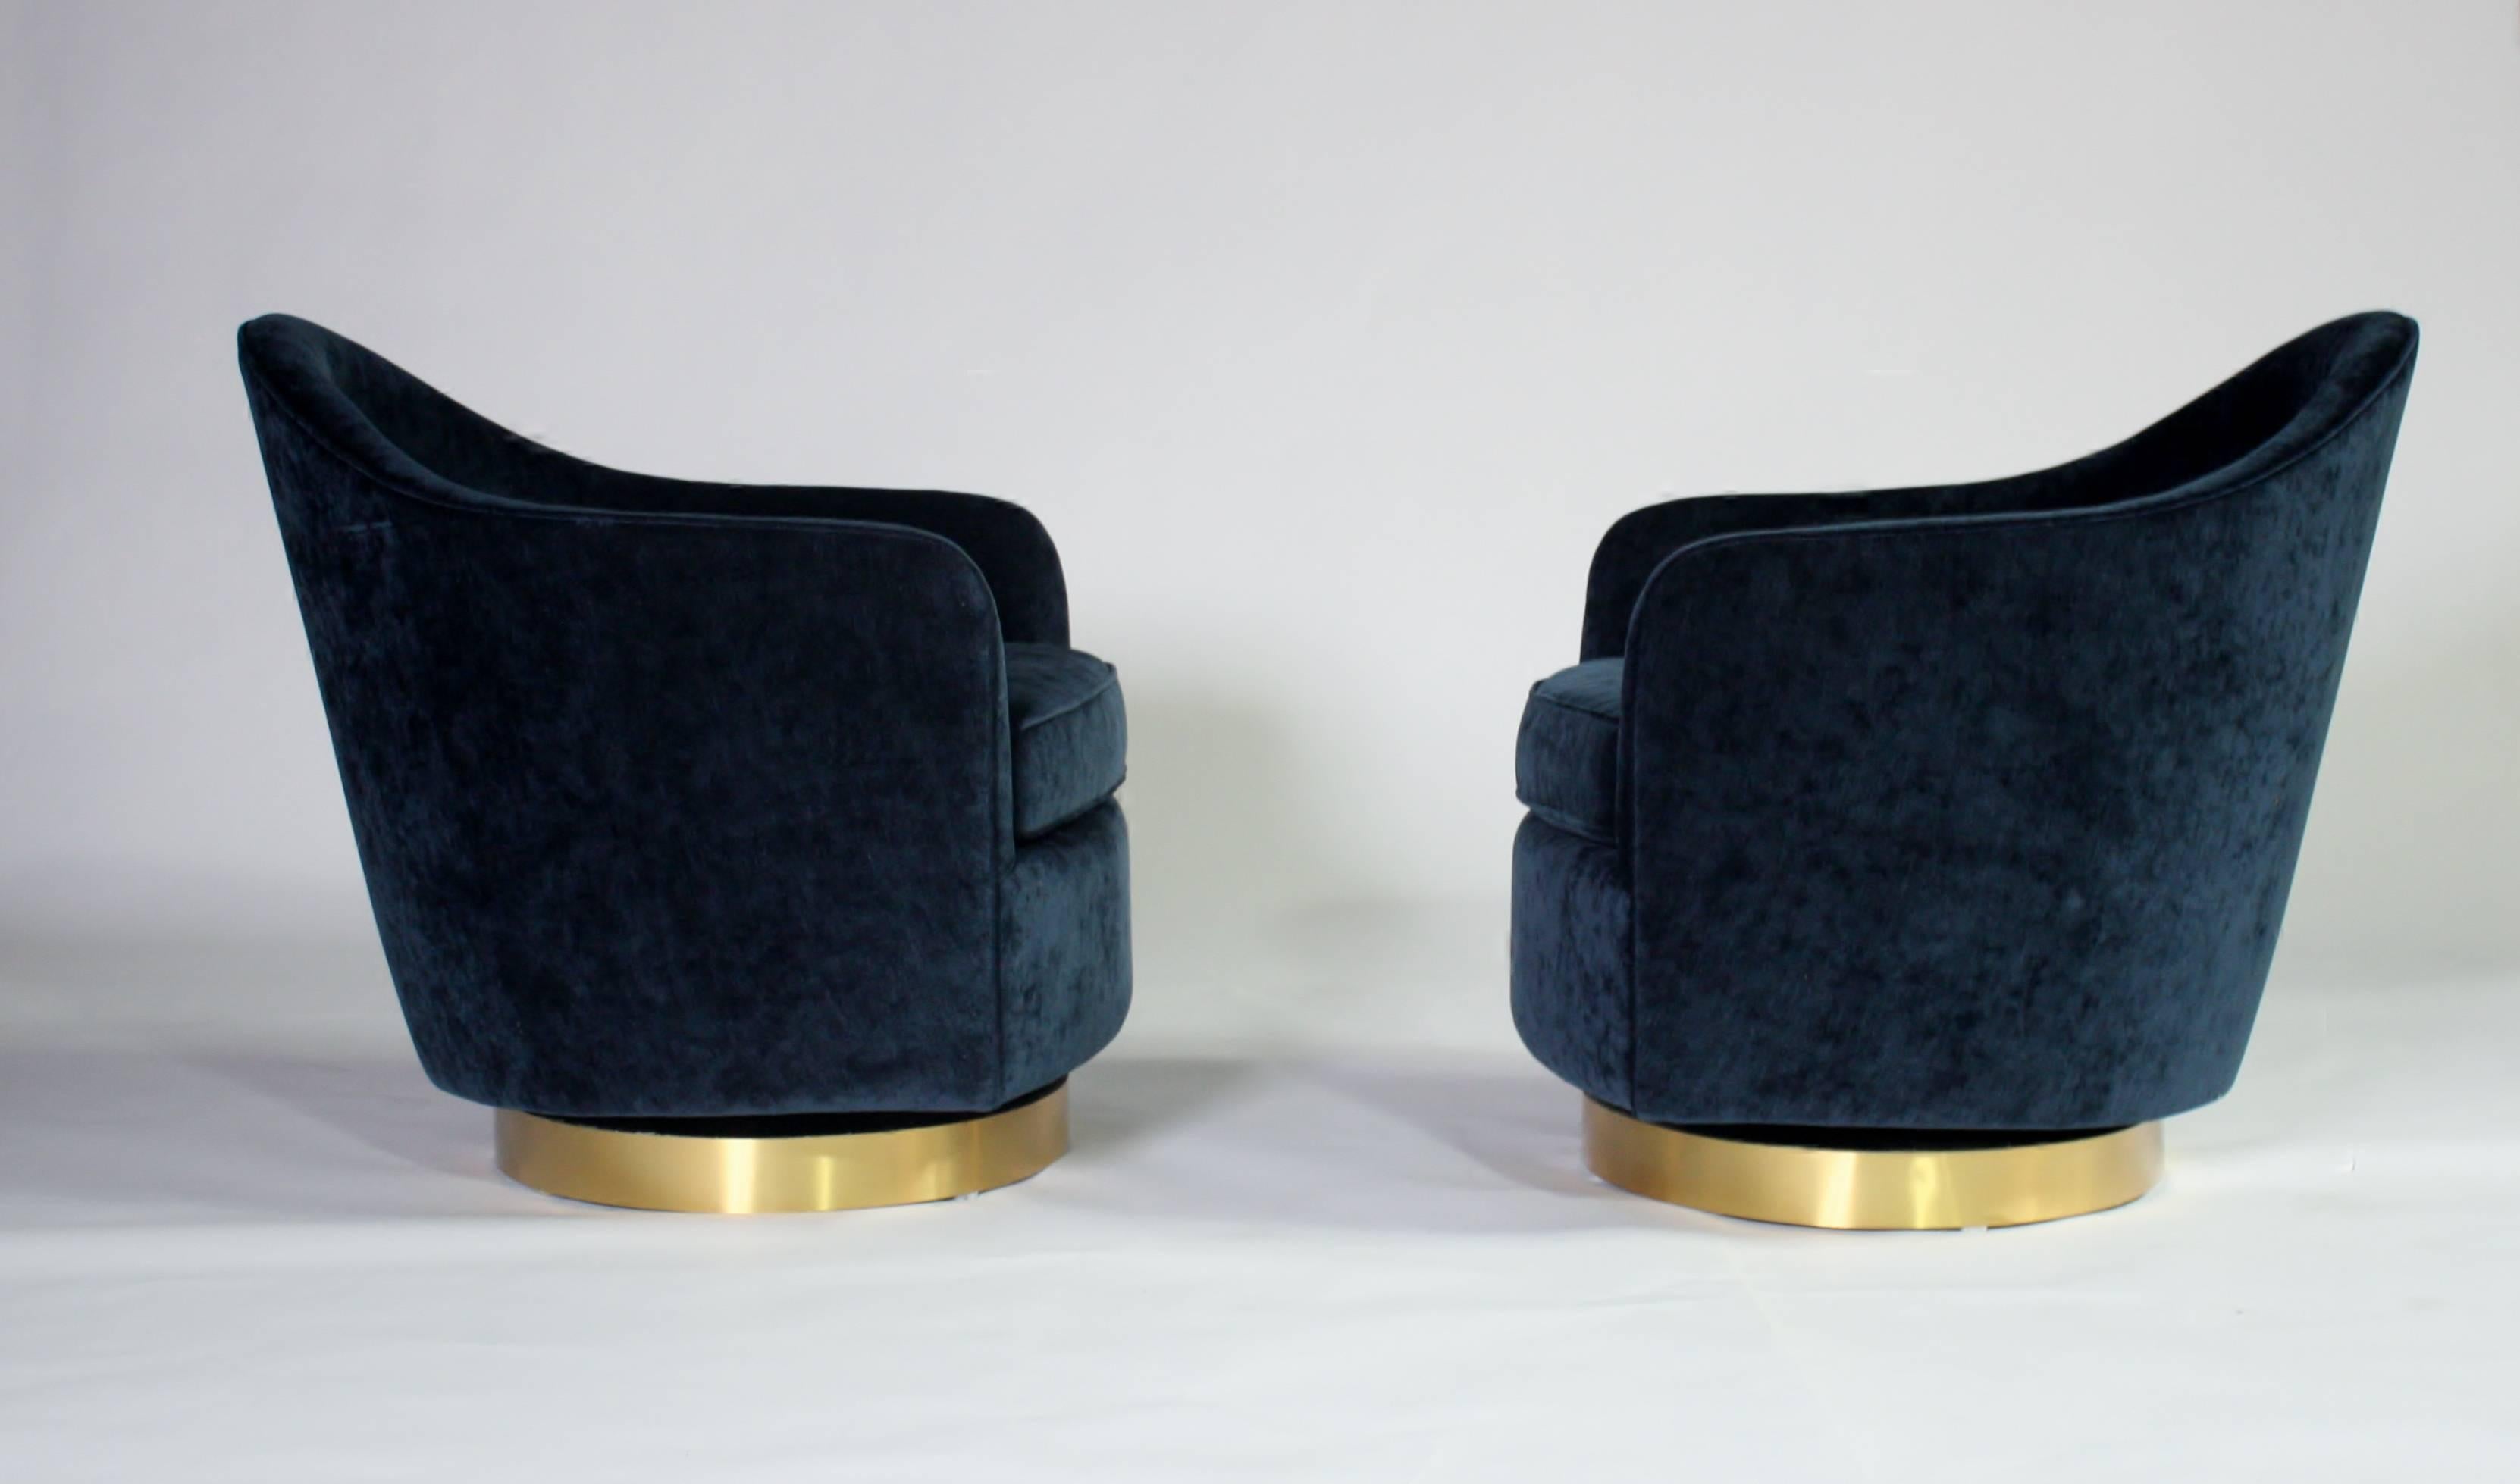 Pair of 1970s barrel-back, teardrop-shape, tilt and swivel chairs designed by Milo Baughman for Thayer Coggin completely reupholstered and restored in Vanguard 